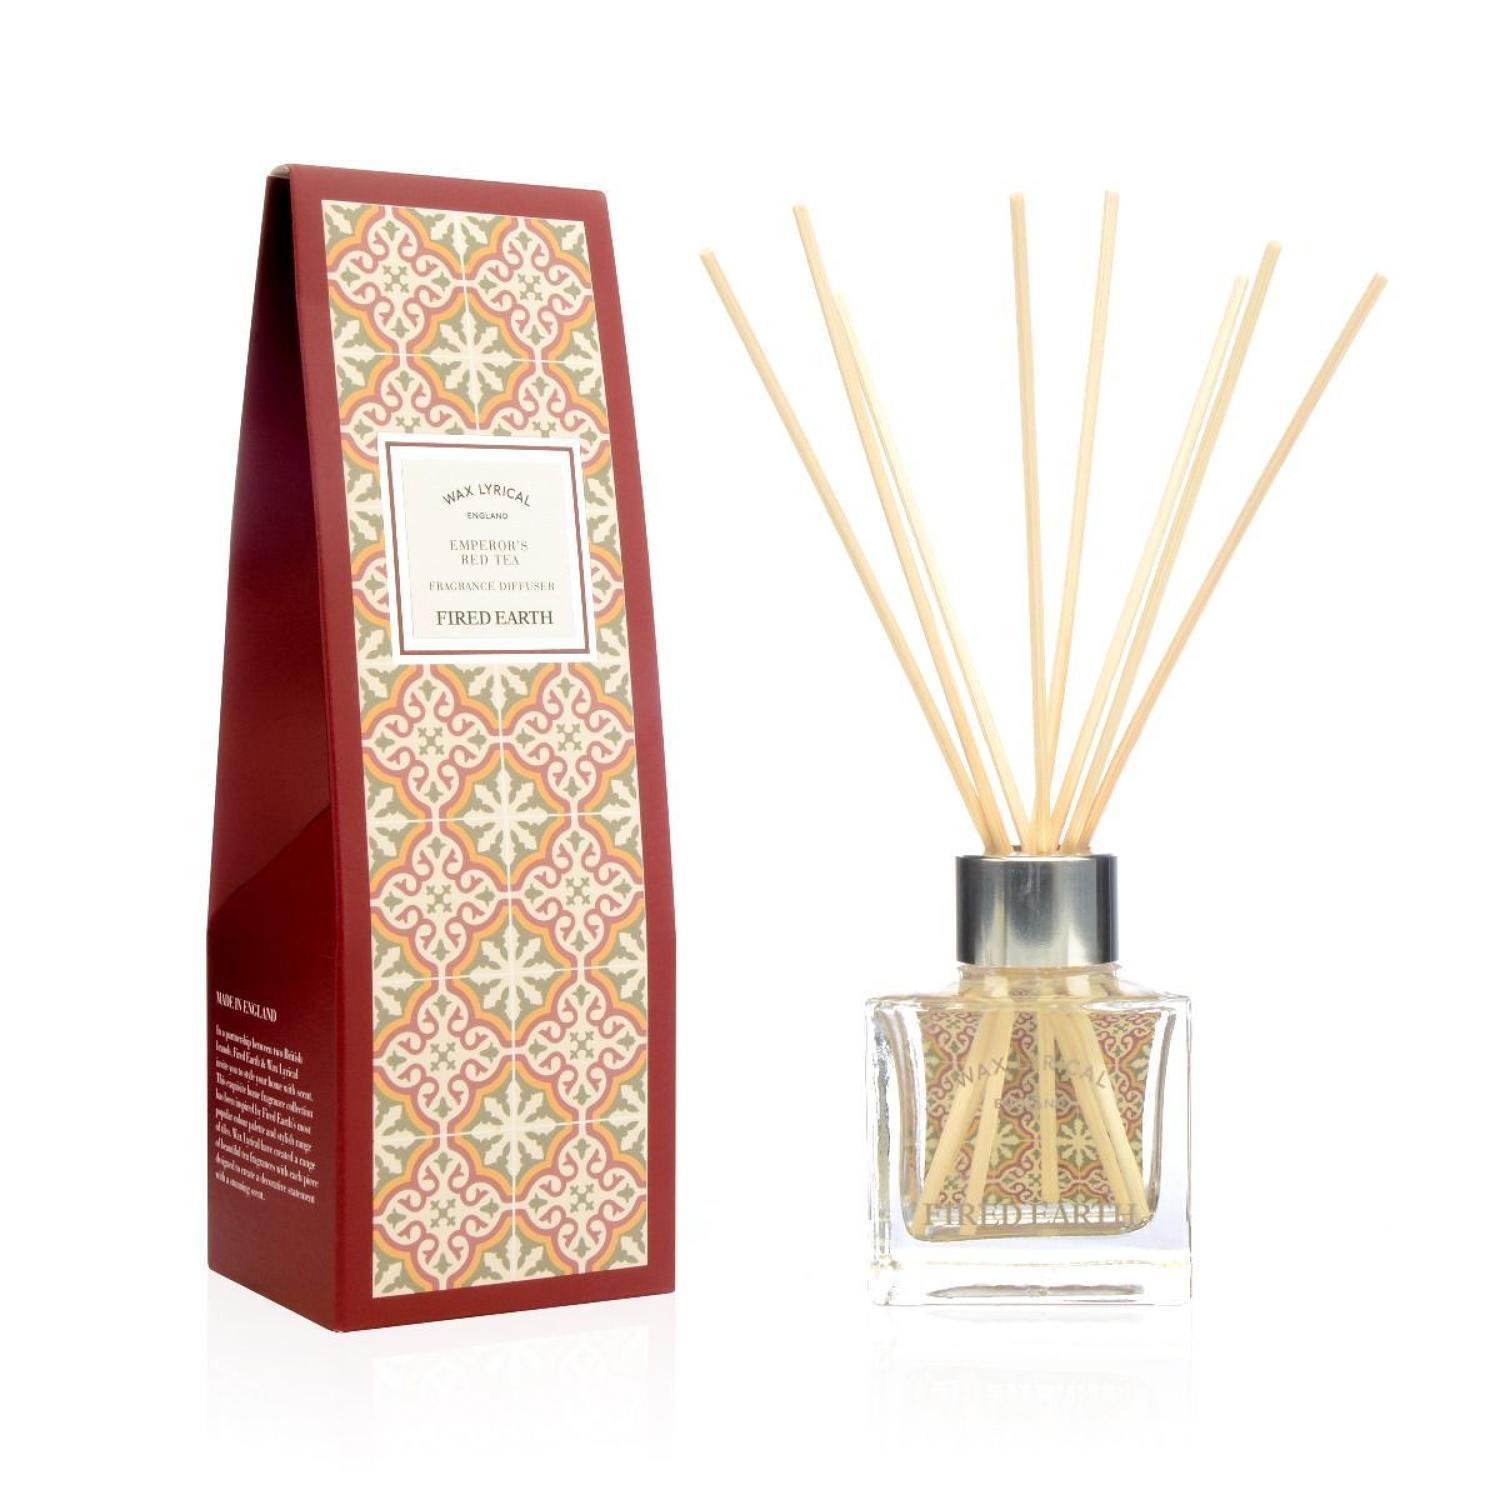 Wax Lyrical Fired Earth Emperors Red Tea Reed Diffuser